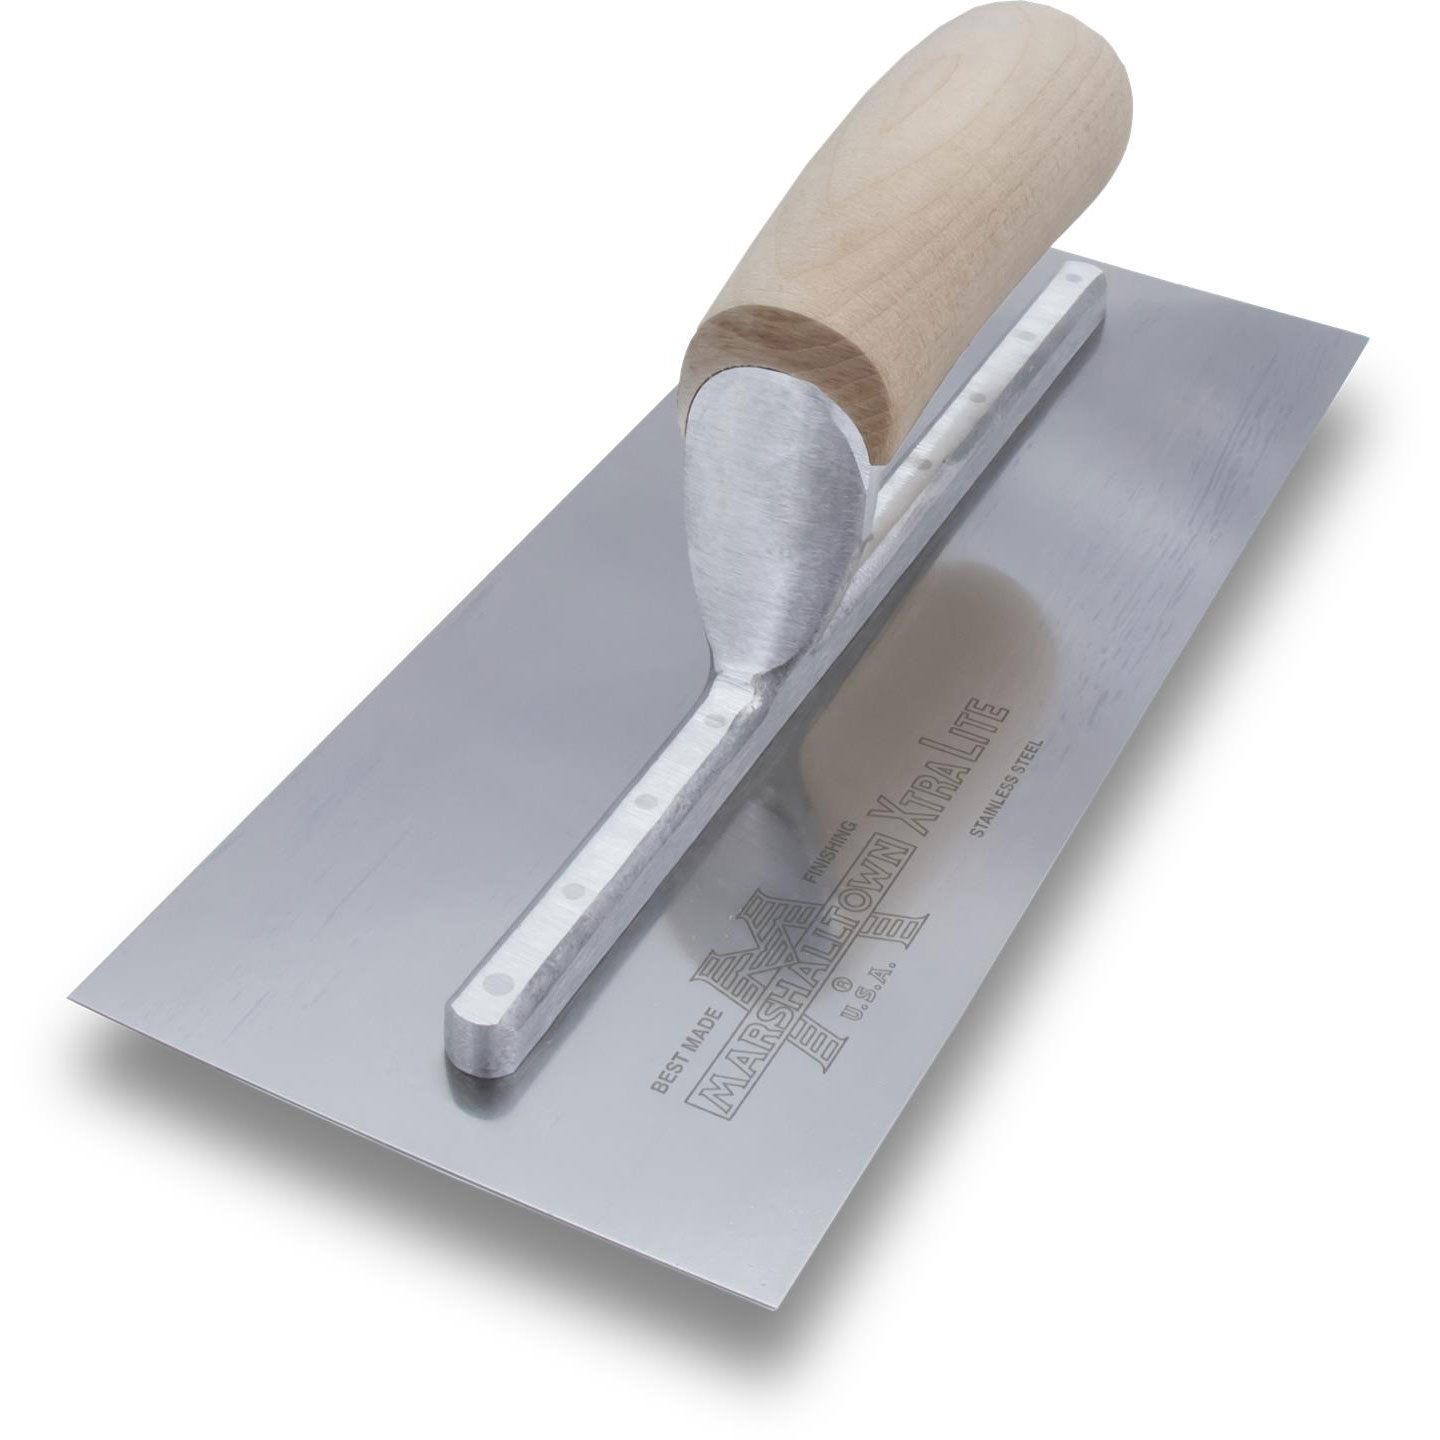 Marshalltown MXS4SS 11-1/2in x 4-3/4in Stainless Finishing Trowel with Curved Wood Handle MXS4SS